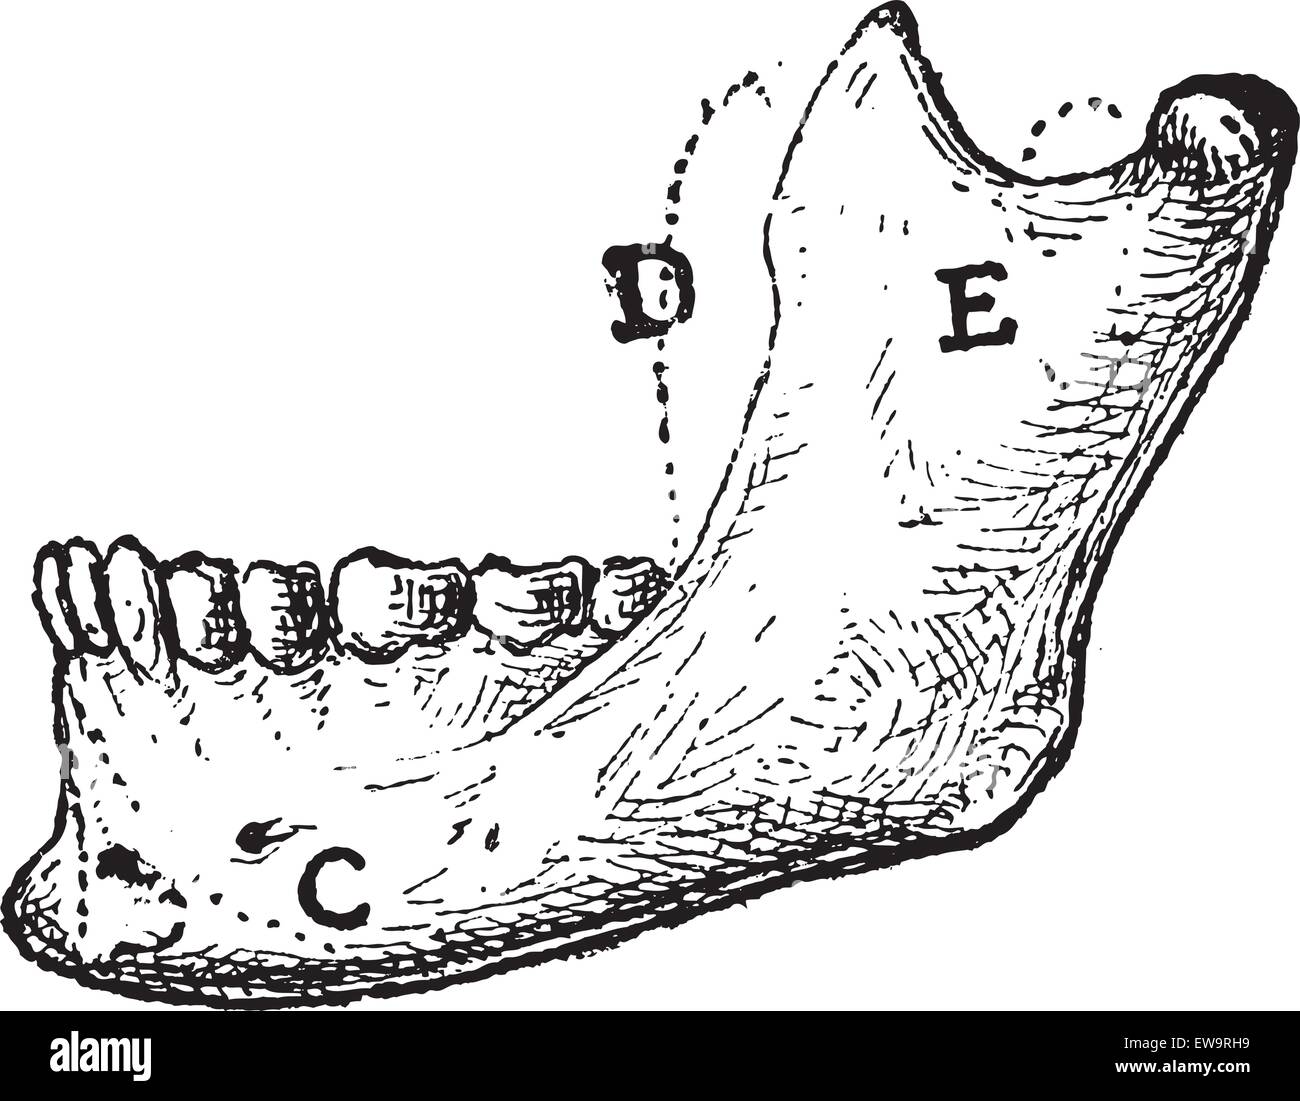 Human Mandible, showing (A) Mental Protuberance, (C) Triangularis, (D) Coronoid Process, and (E) Masseter, vintage engraved illustration. Dictionary of Words and Things - Larive and Fleury - 1895 Stock Vector